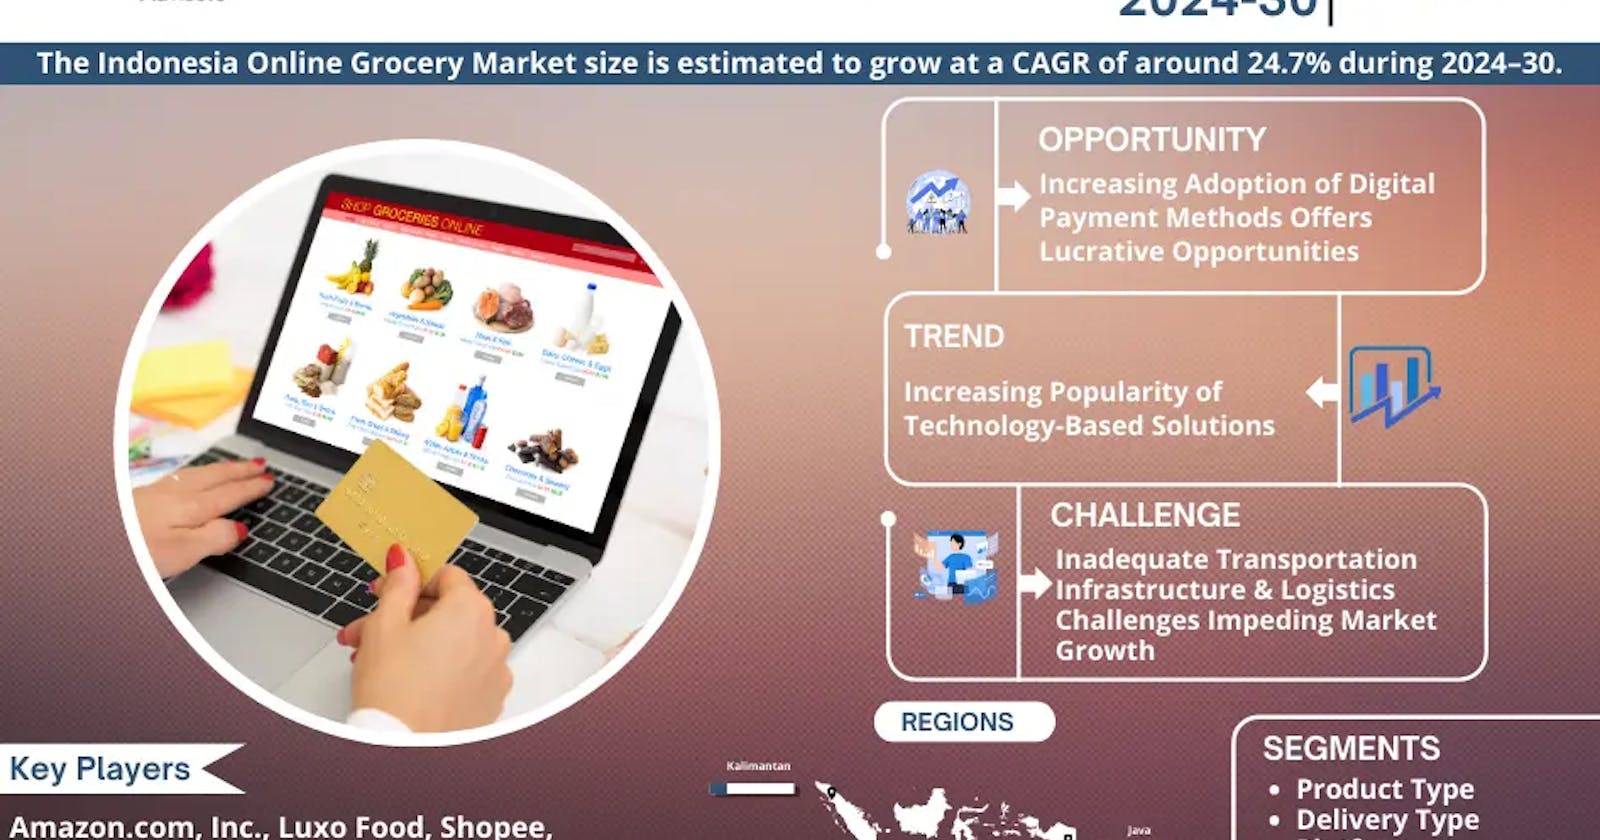 Indonesia Online Grocery Market Share, Size, and Growth Forecast: 24.7% CAGR (2024-30)